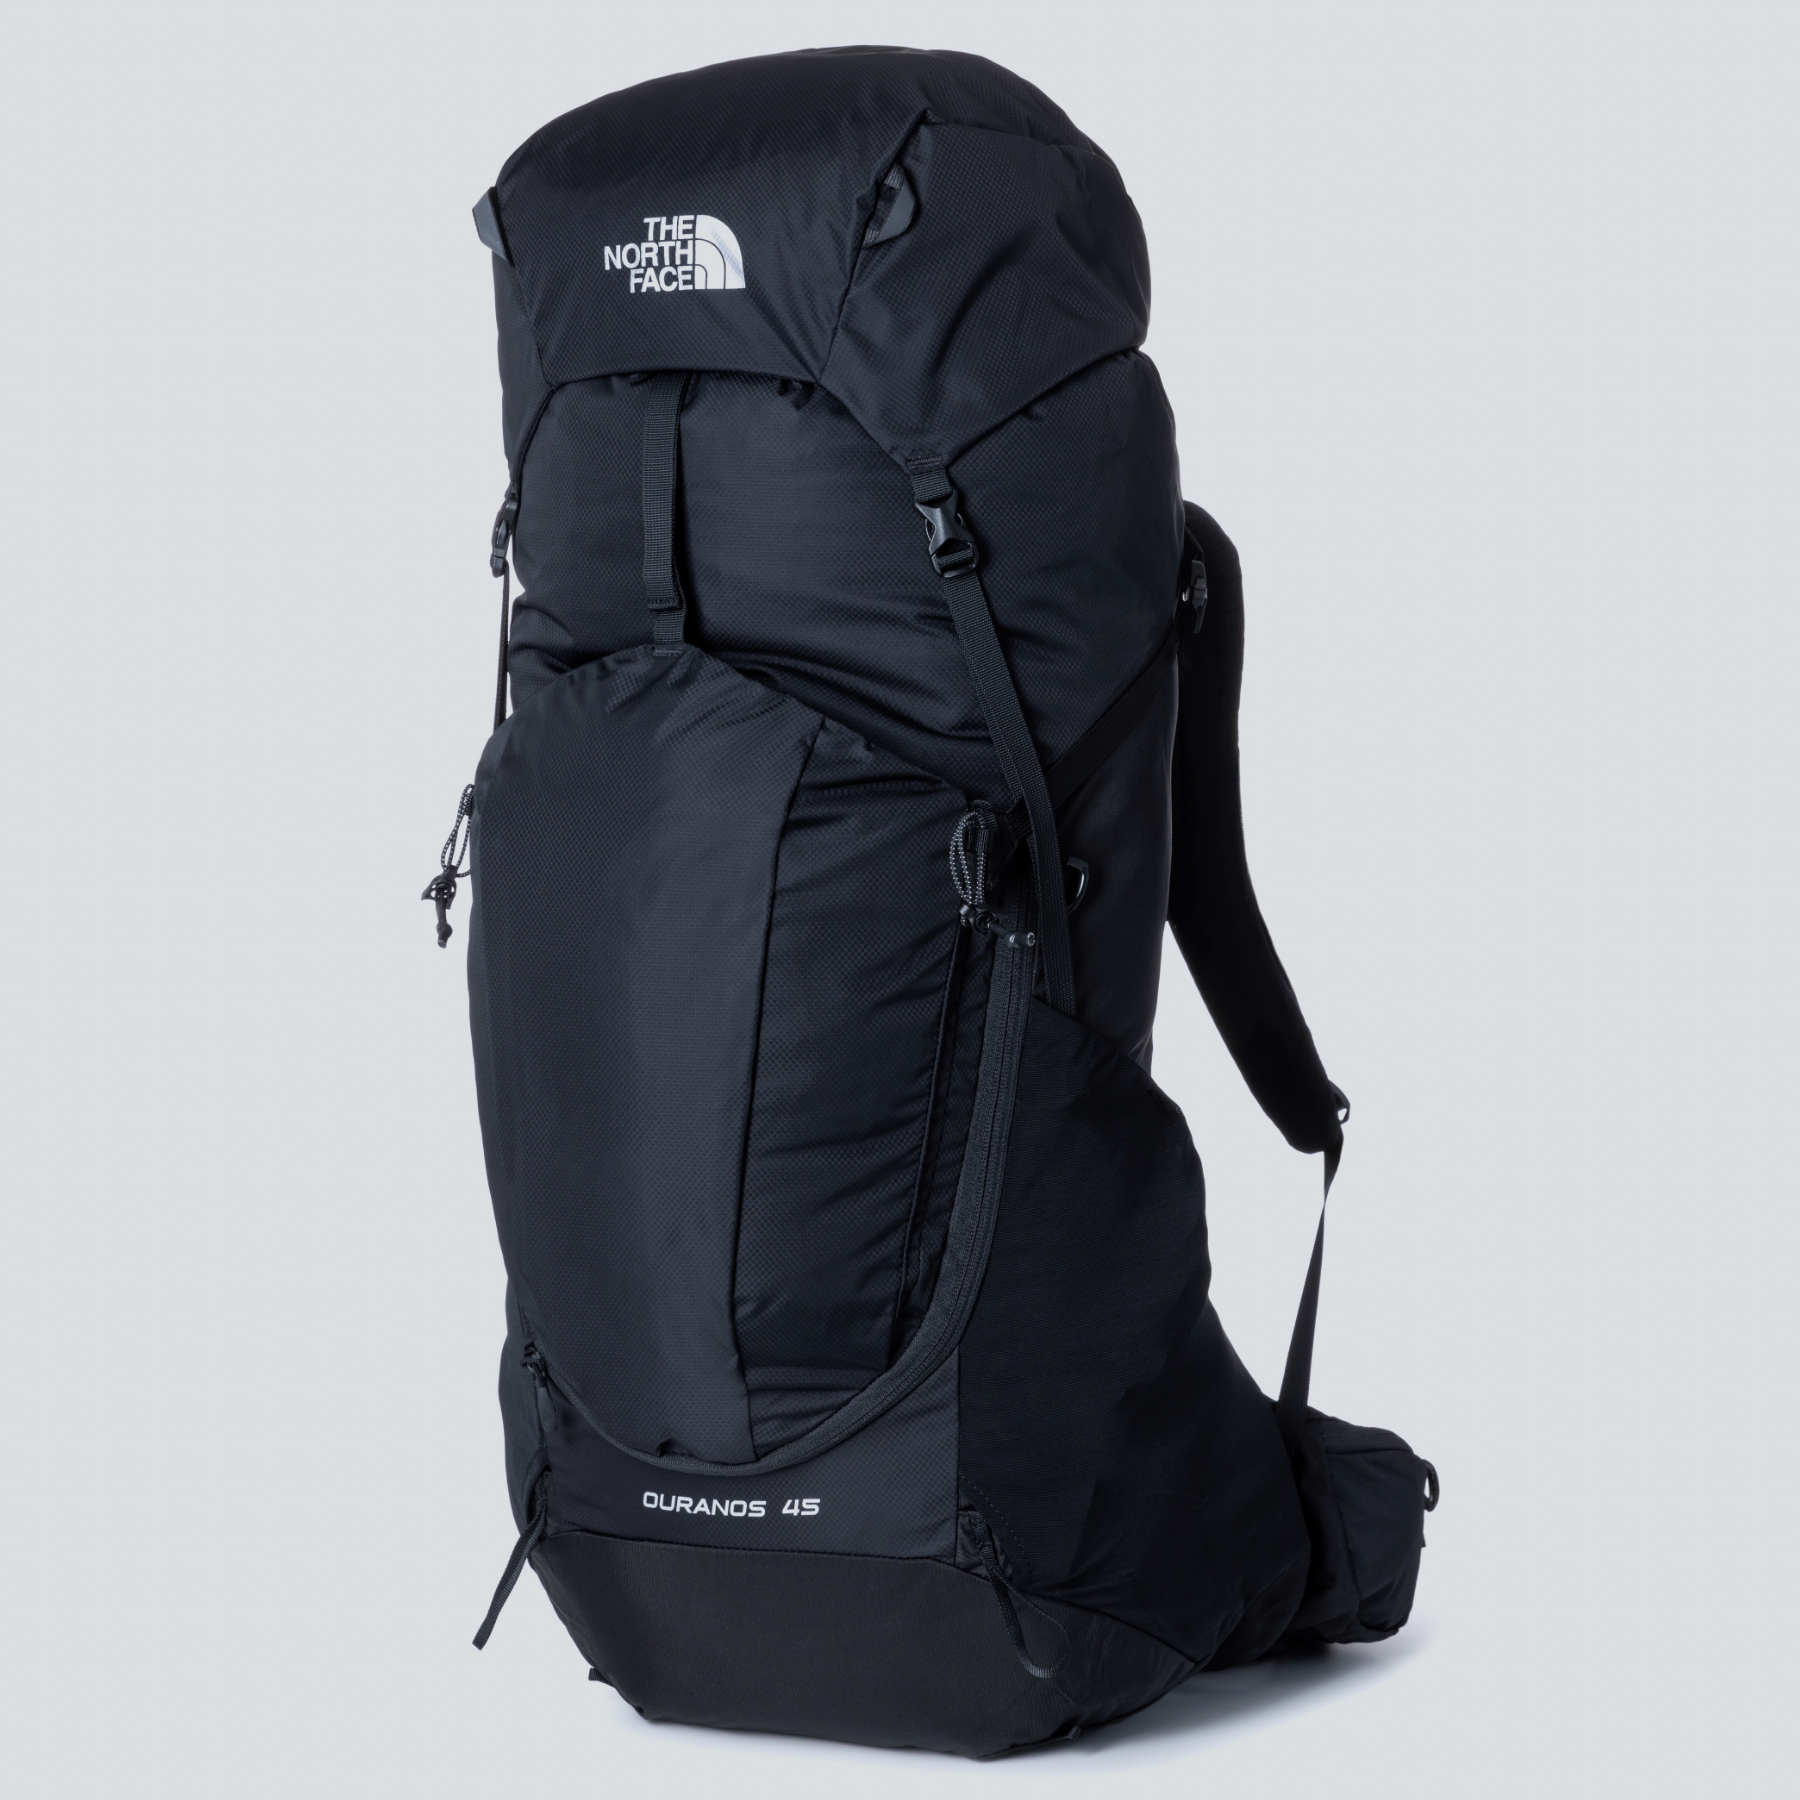 OURANOS 45(NM62345) - THE NORTH FACE MOUNTAIN